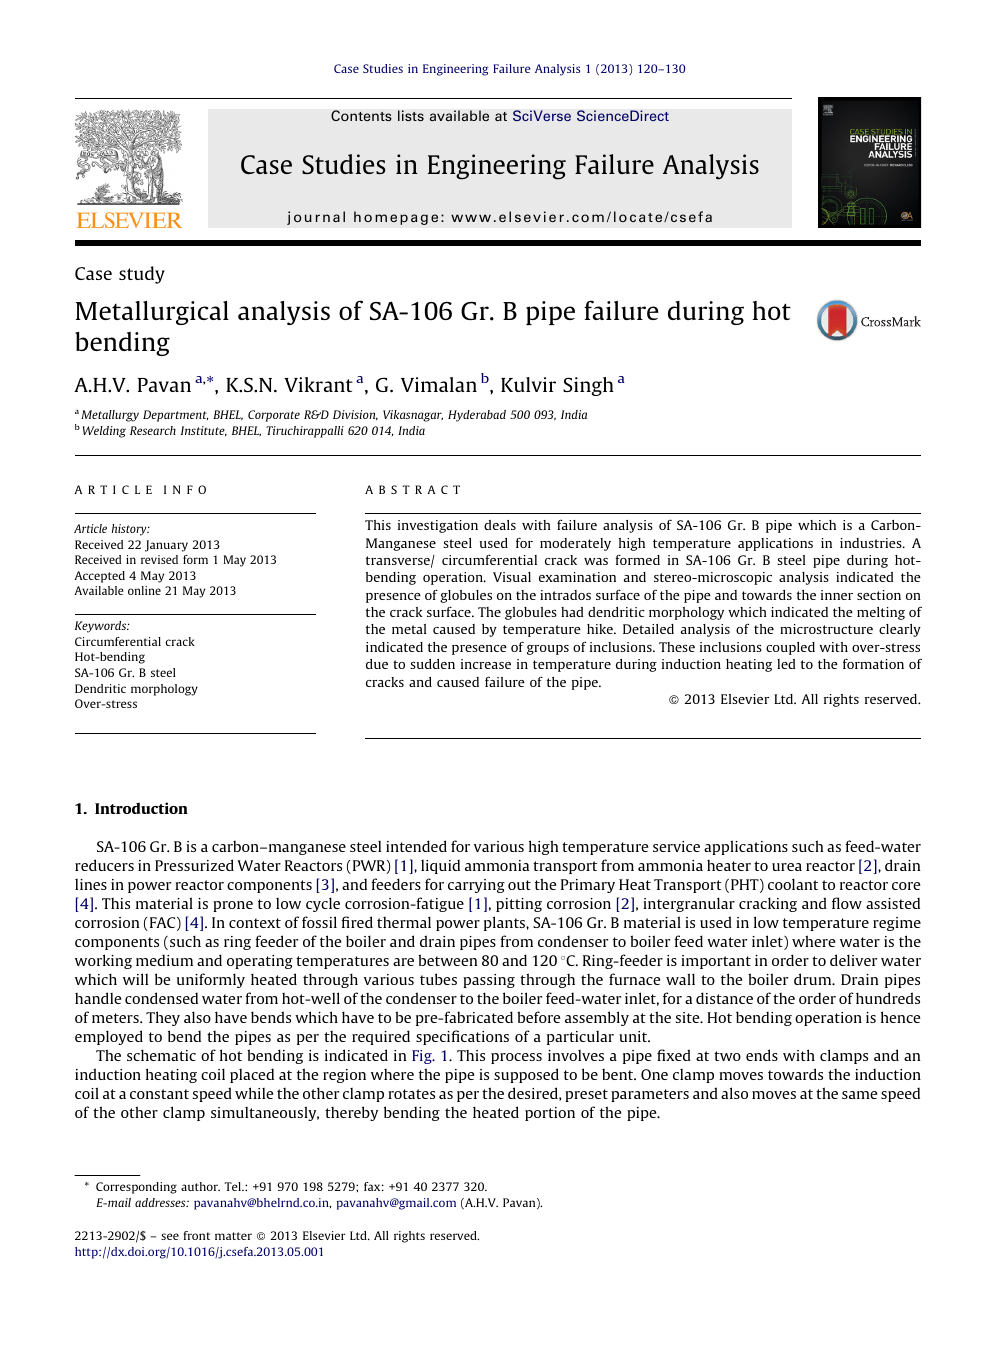 Metallurgical Analysis Of Sa 106 Gr B Pipe Failure During Hot Bending Topic Of Research Paper In Materials Engineering Download Scholarly Article Pdf And Read For Free On Cyberleninka Open Science Hub